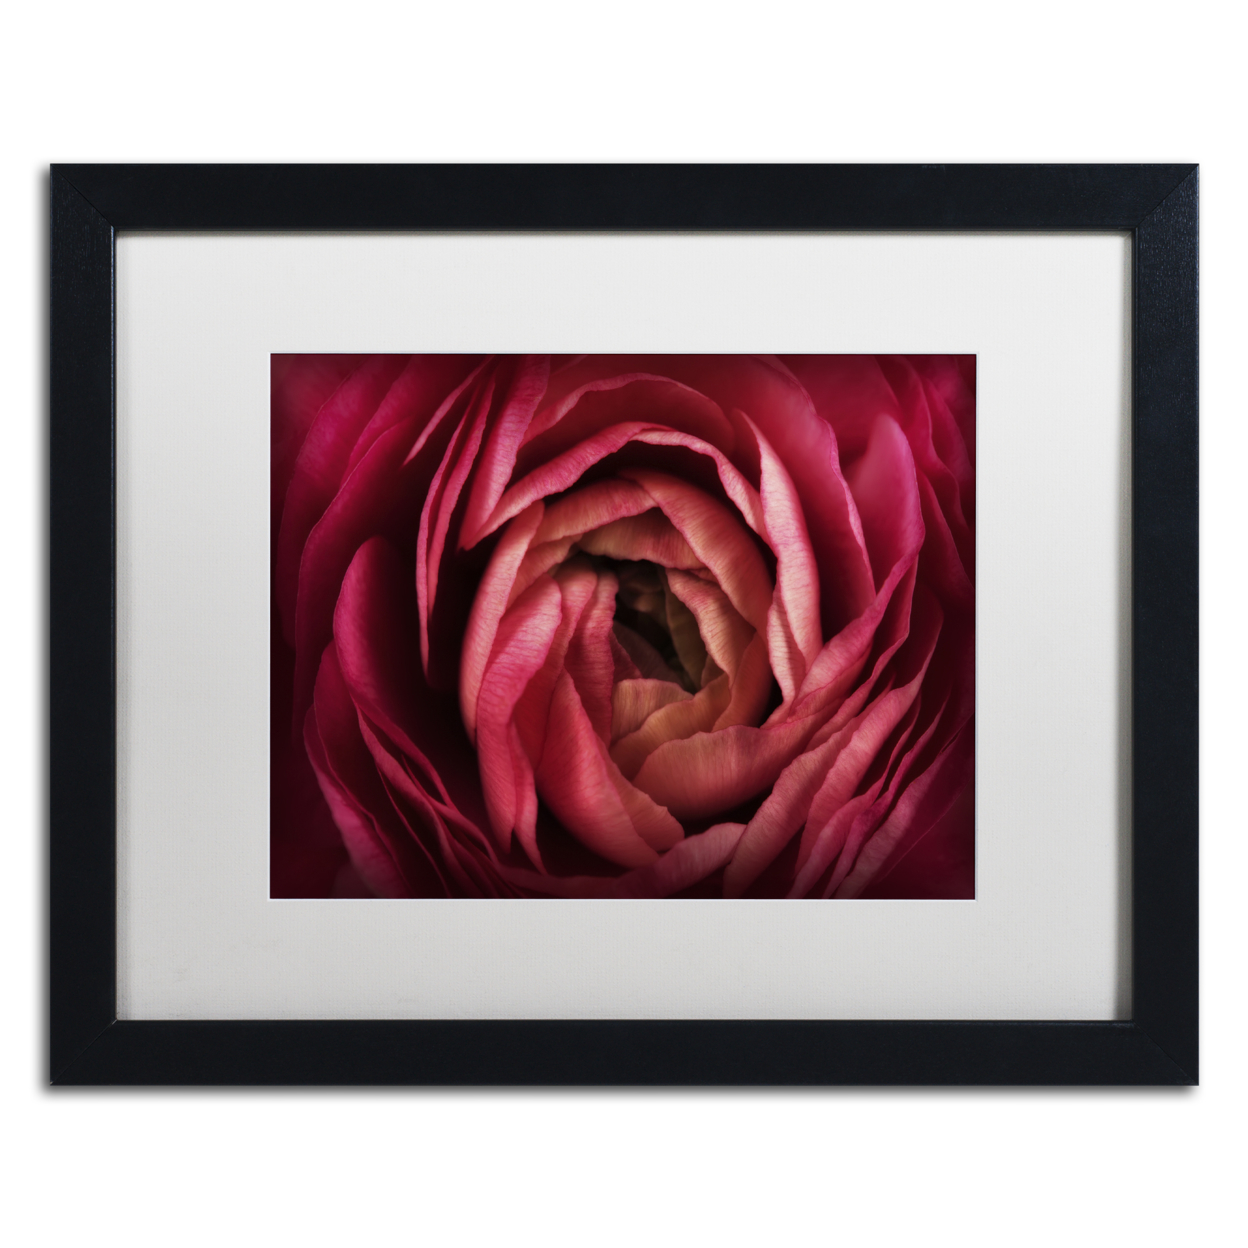 Cora Niele 'Glowing Ruby Red Ranunculus' Black Wooden Framed Art 18 X 22 Inches